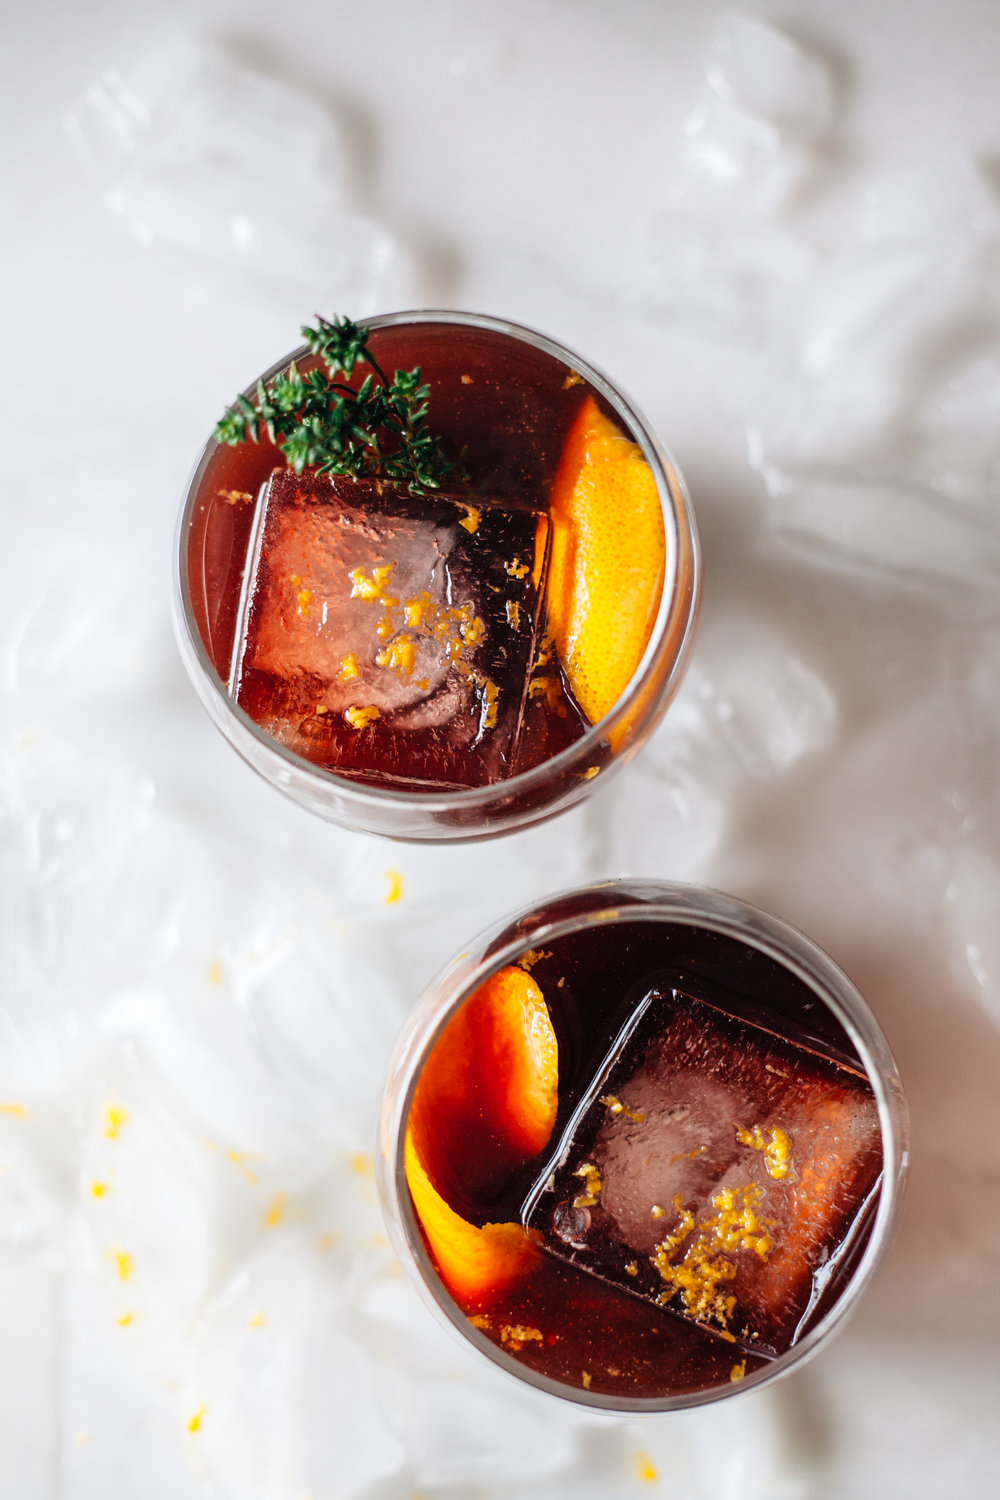 How to Make a Black Cherry Old Fashioned? 